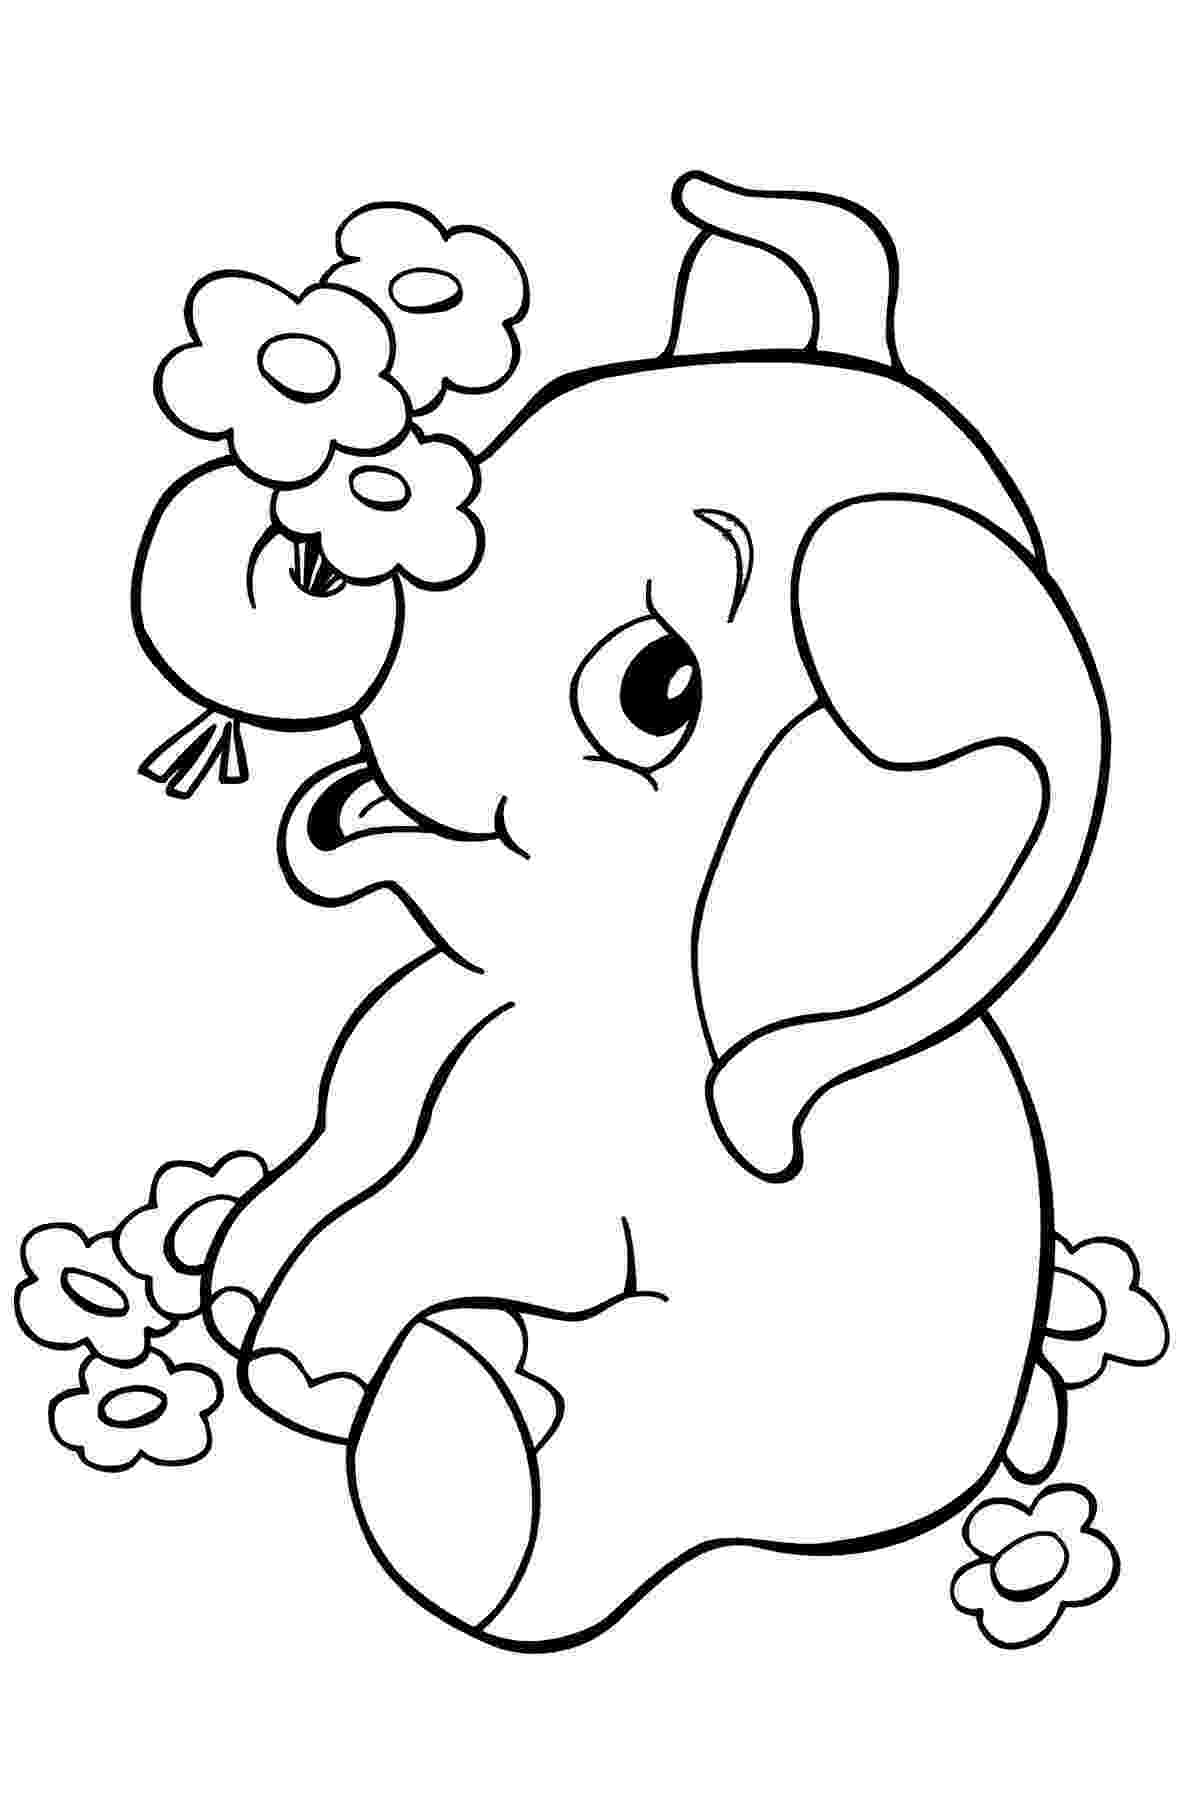 elephant pictures to color elephant coloring pages for kids printable for free elephant pictures color to 